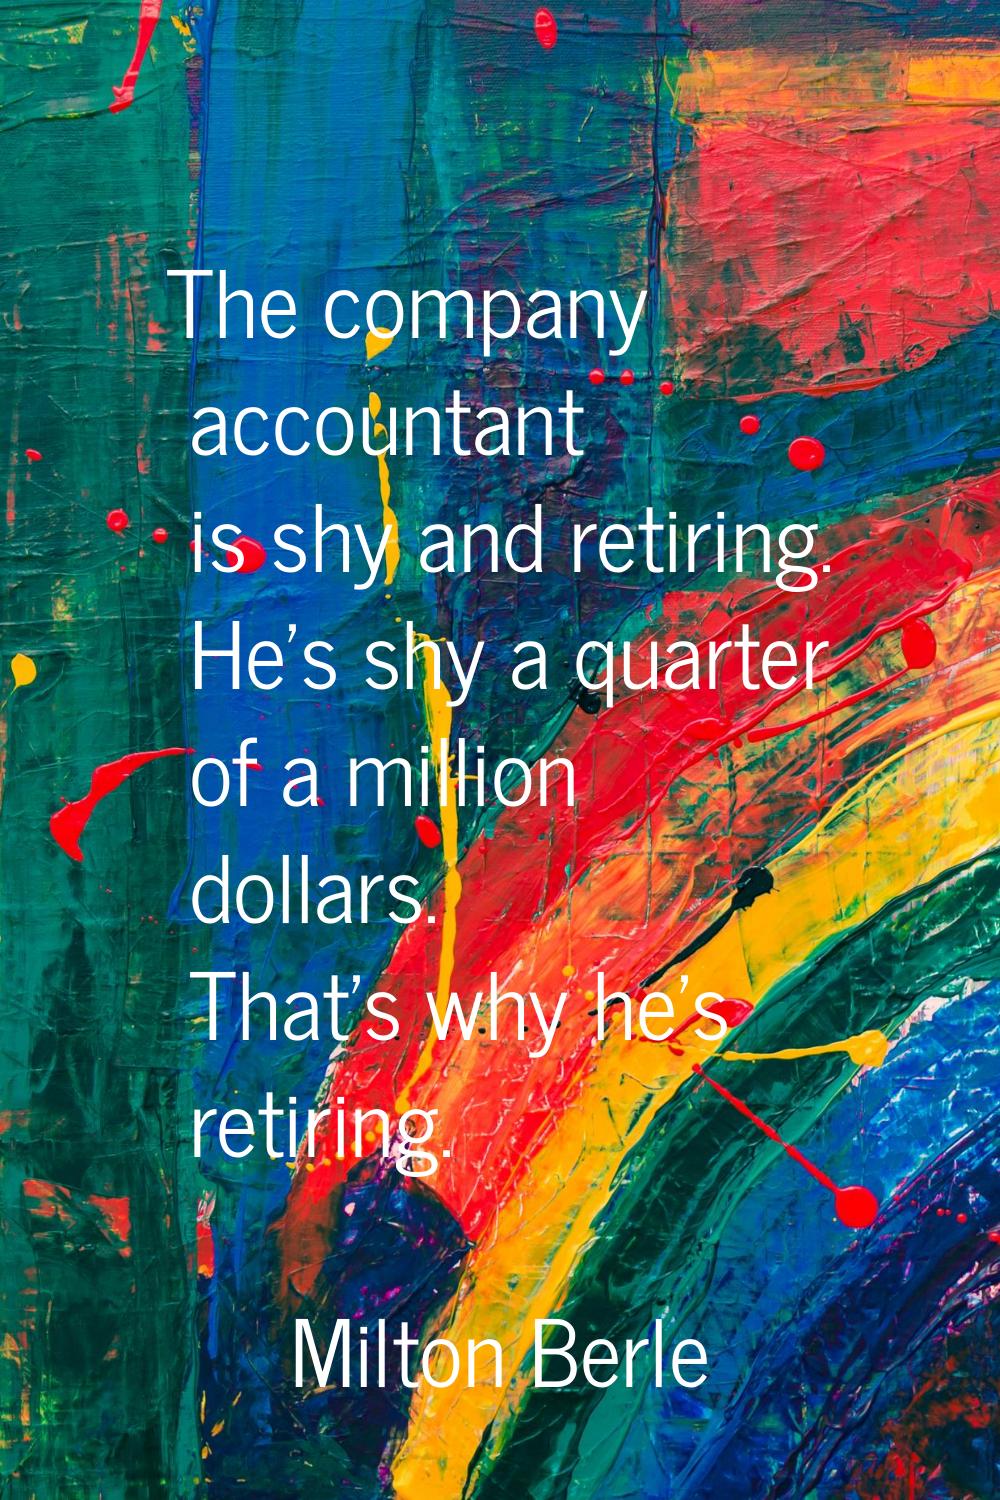 The company accountant is shy and retiring. He's shy a quarter of a million dollars. That's why he'